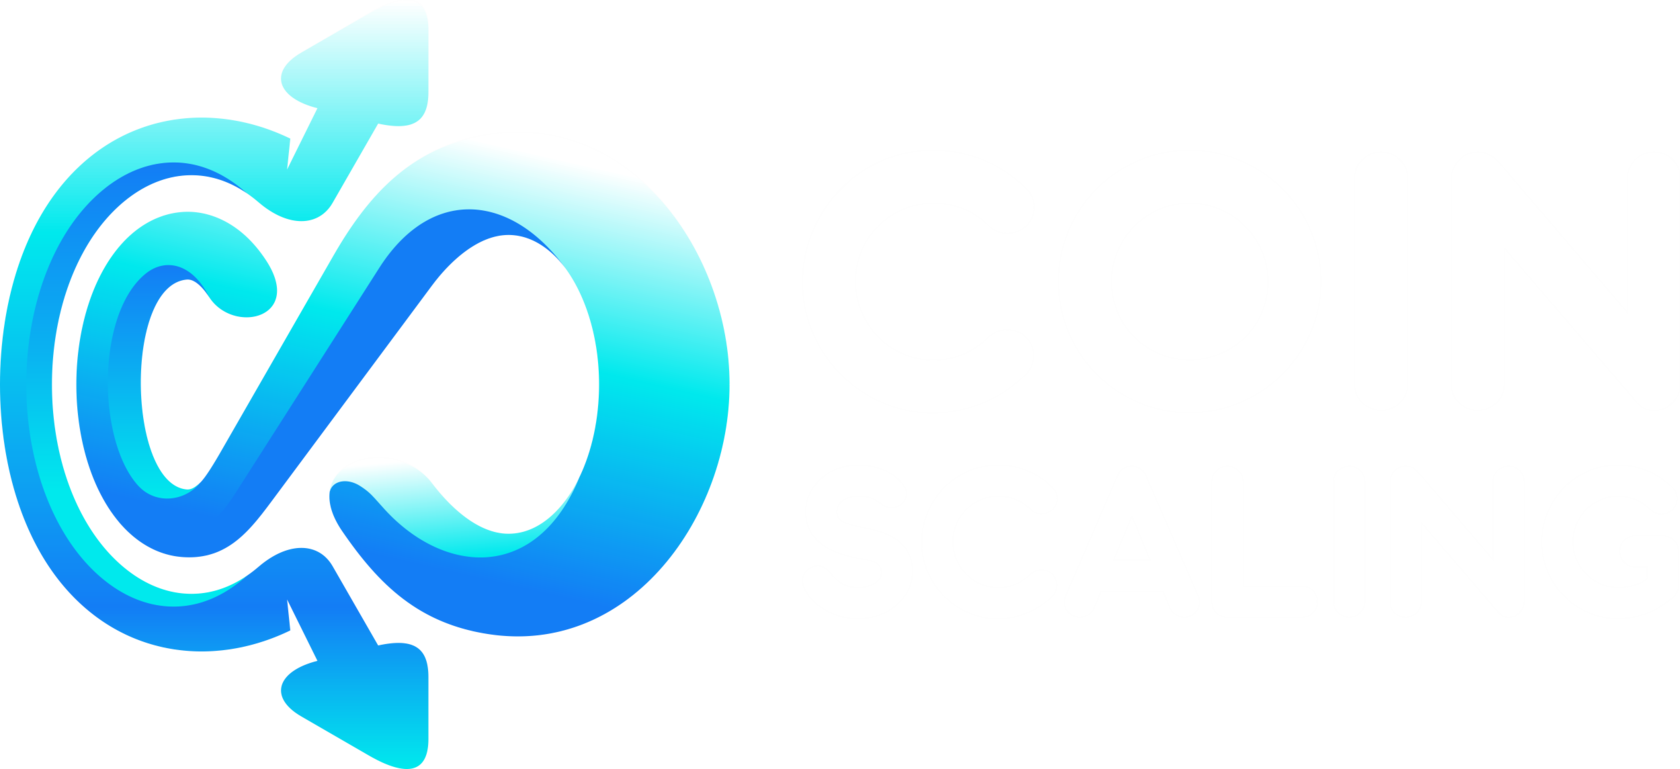  COIN SCALING 